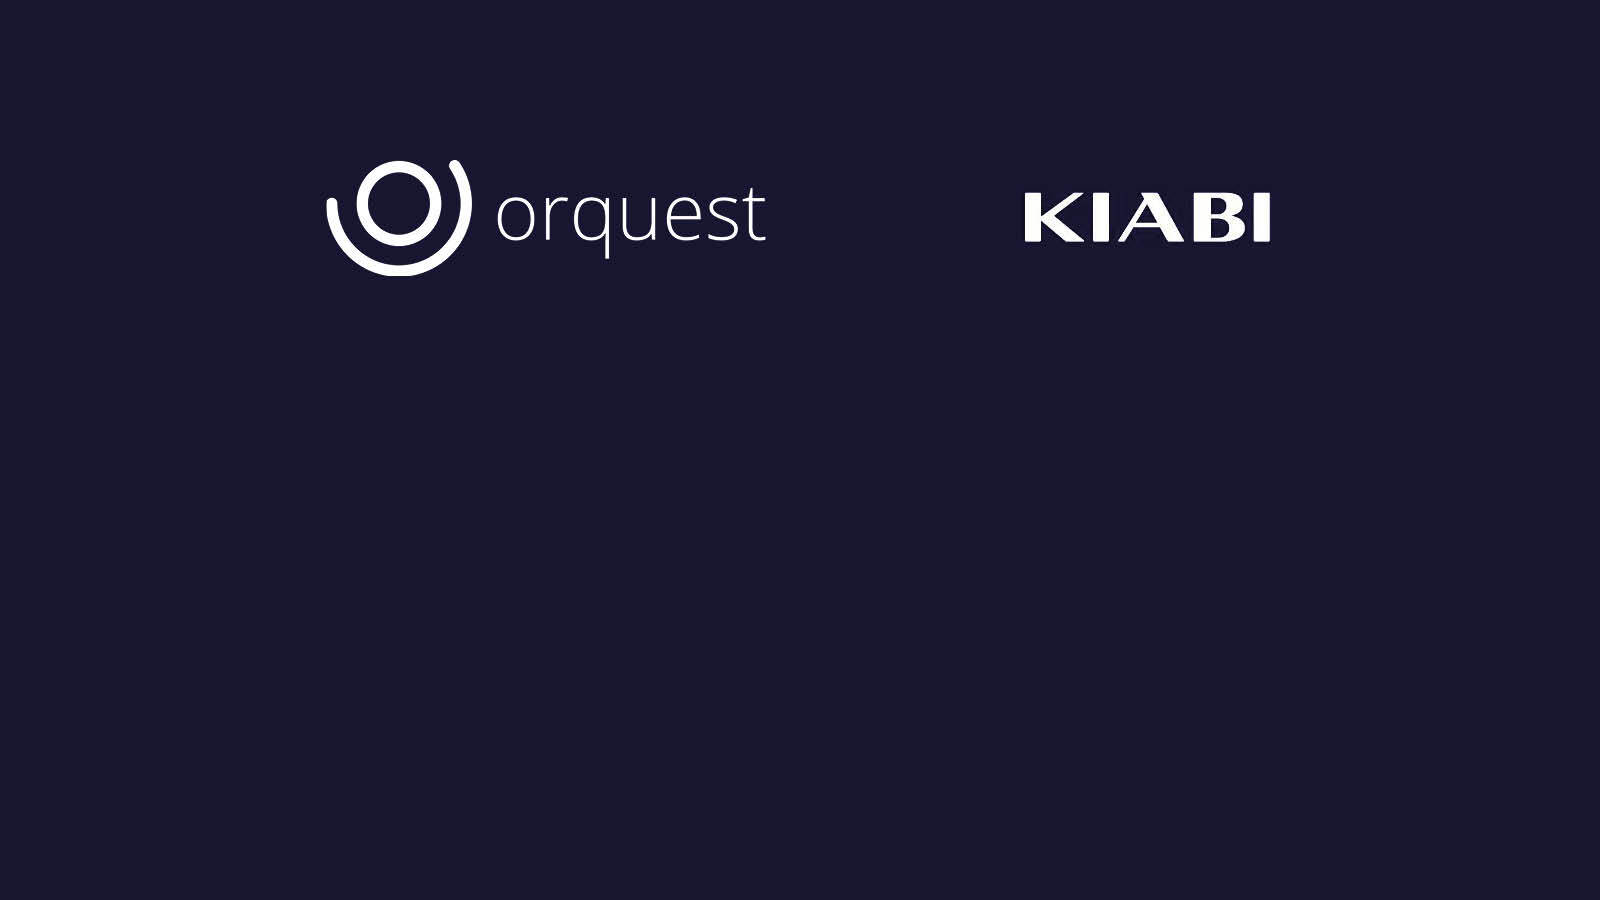 Kiabi’s digital strategy to connect with its customers